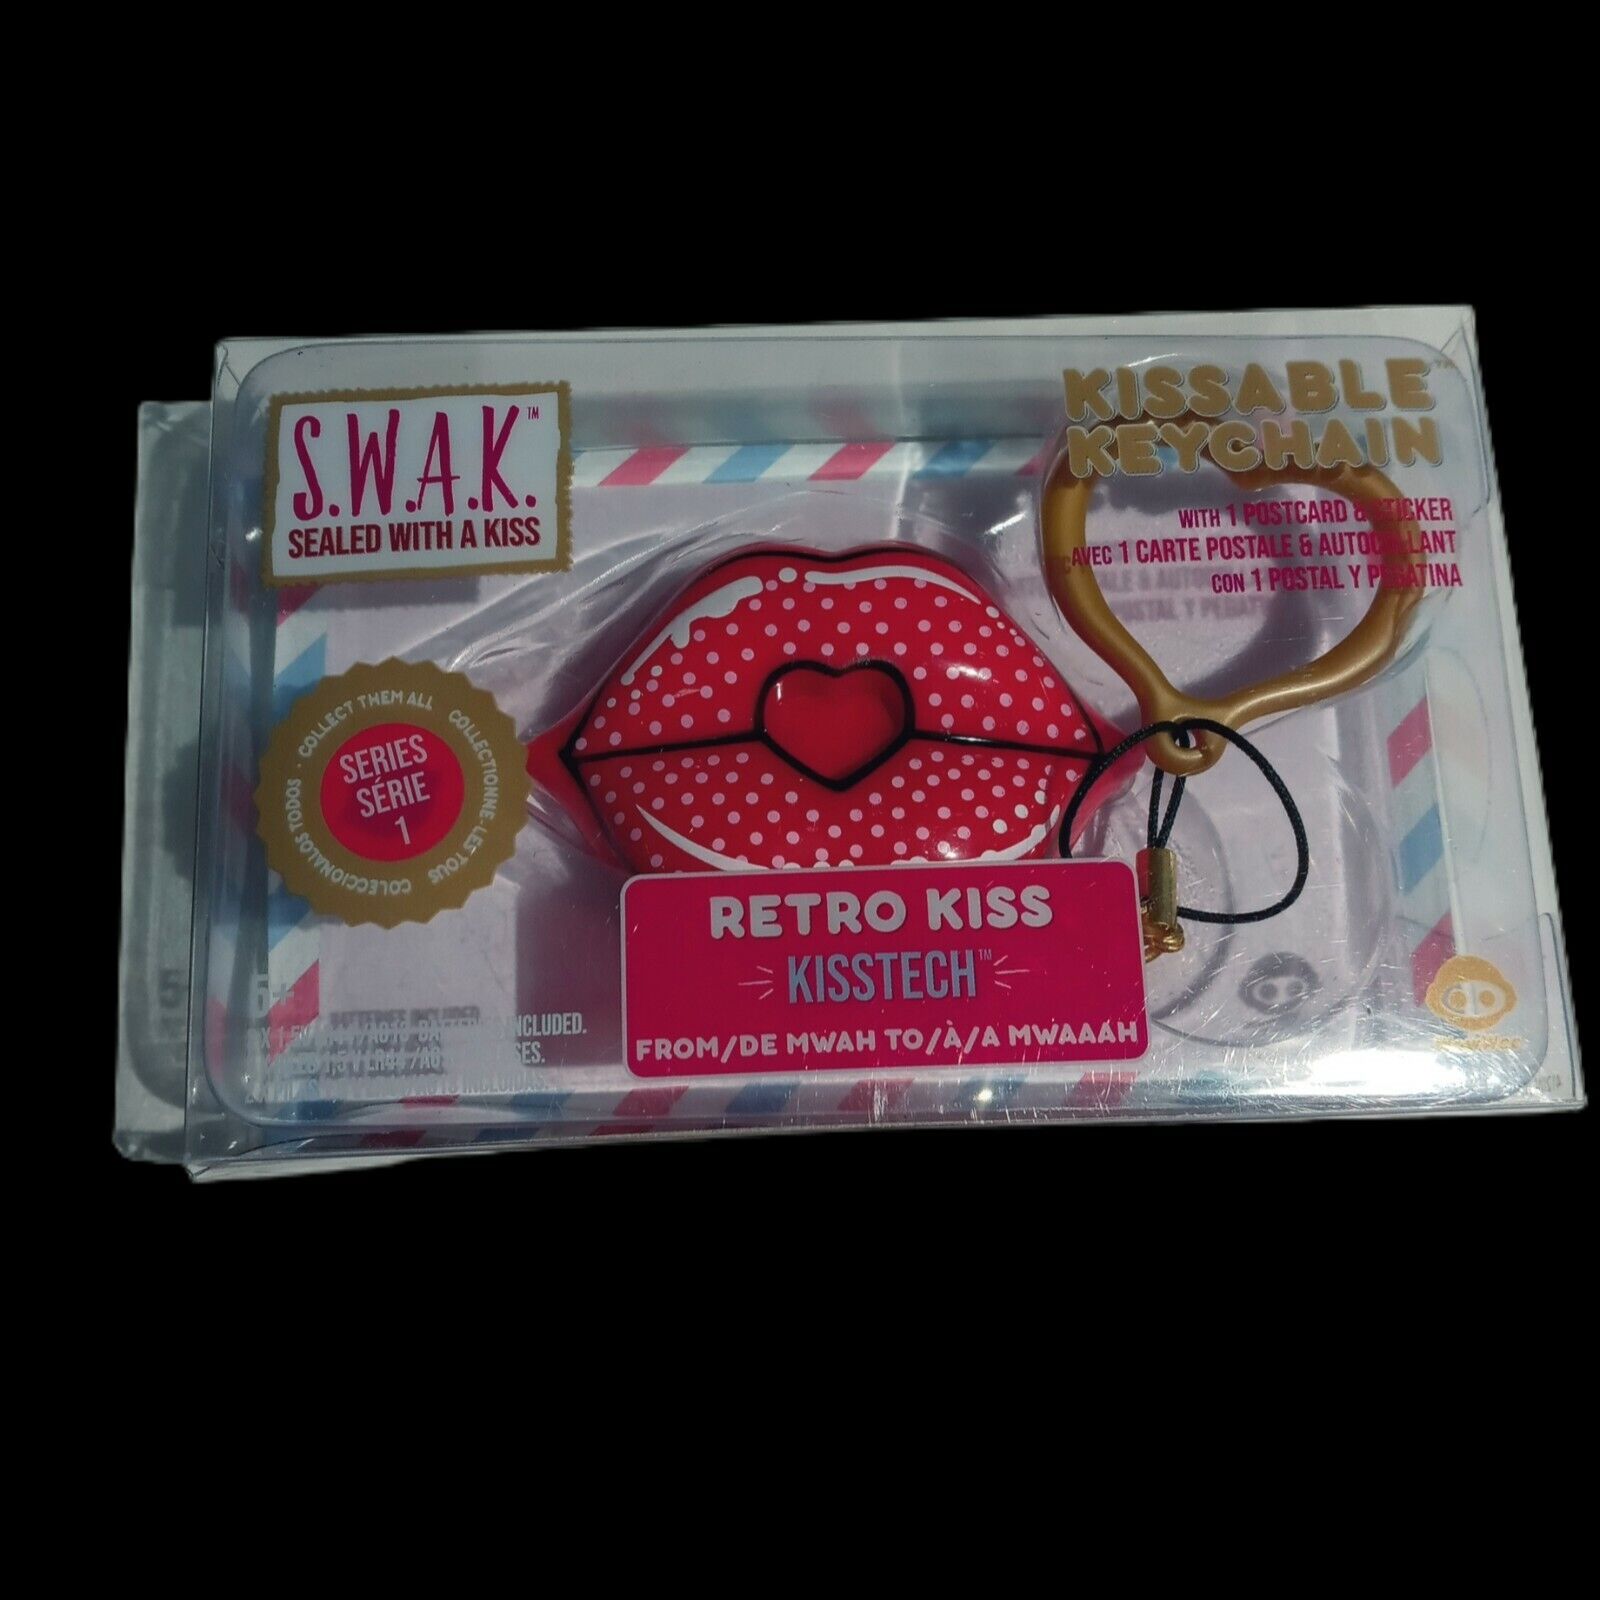 Kissable Key Chain Wowwee - S.w.a.k Sealed With A Kiss  Retro Kiss Red Polka Dot